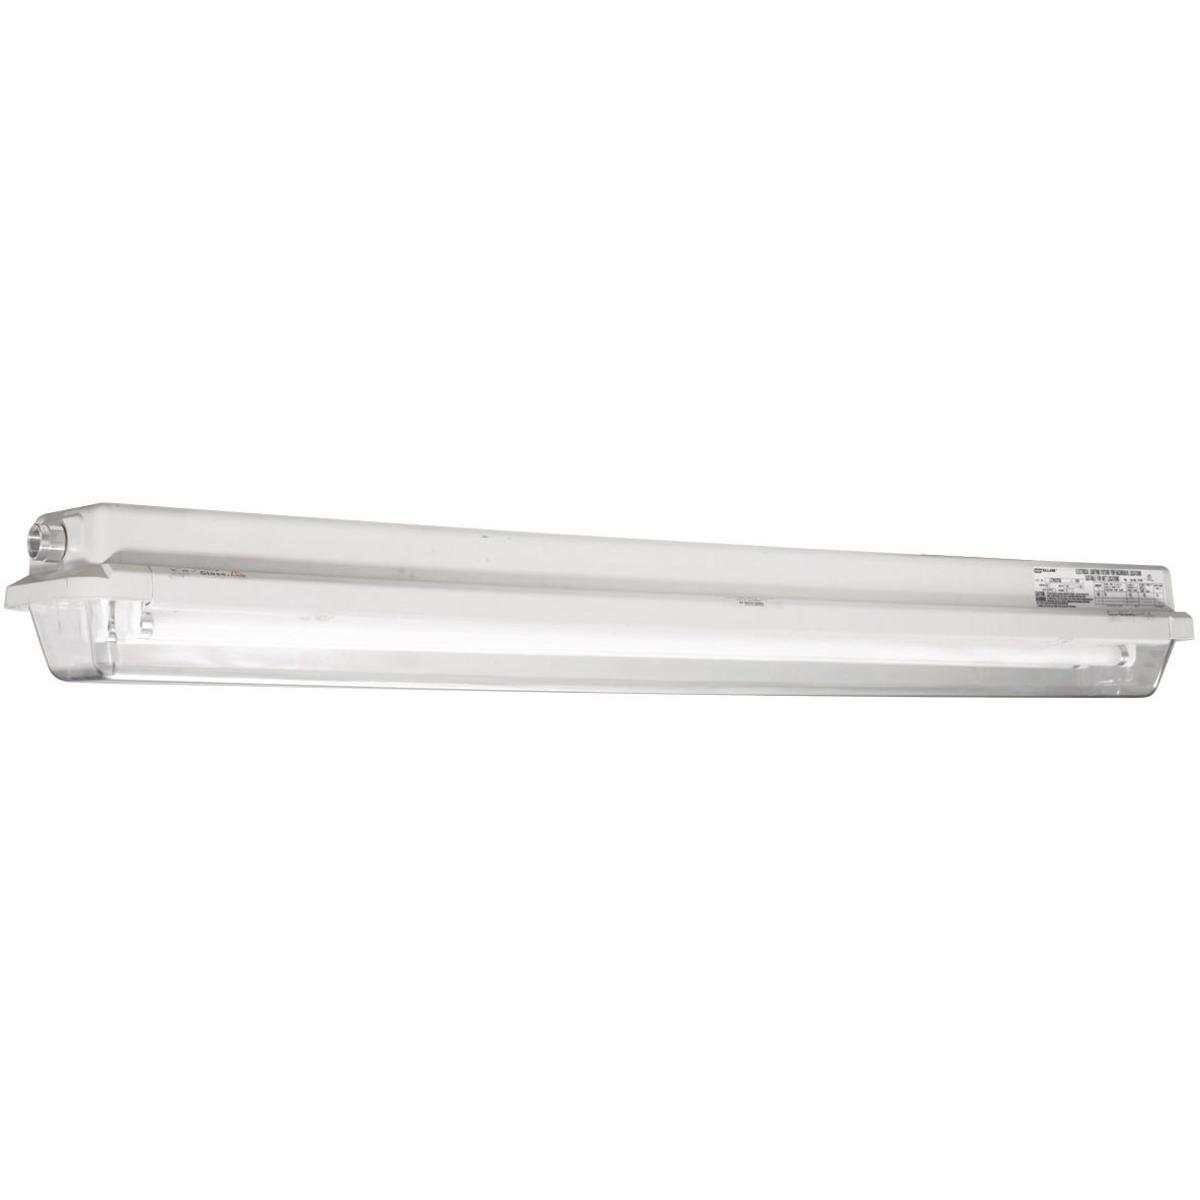 Hubbell LZ2NE1-28330 LZ2NE Series - Non-Metallic 28 Watt Fluorescent Emergency Power Light Fixture (Three 4-Foot Lamps Not Included) - Double-Ended Lamp Type -120-277V At 60Hz - Hub Size 3/4 Inch NPT  ; NEMA 4 & IP66 rated enclosure ; Housing-one piece fiberglass reinforced p